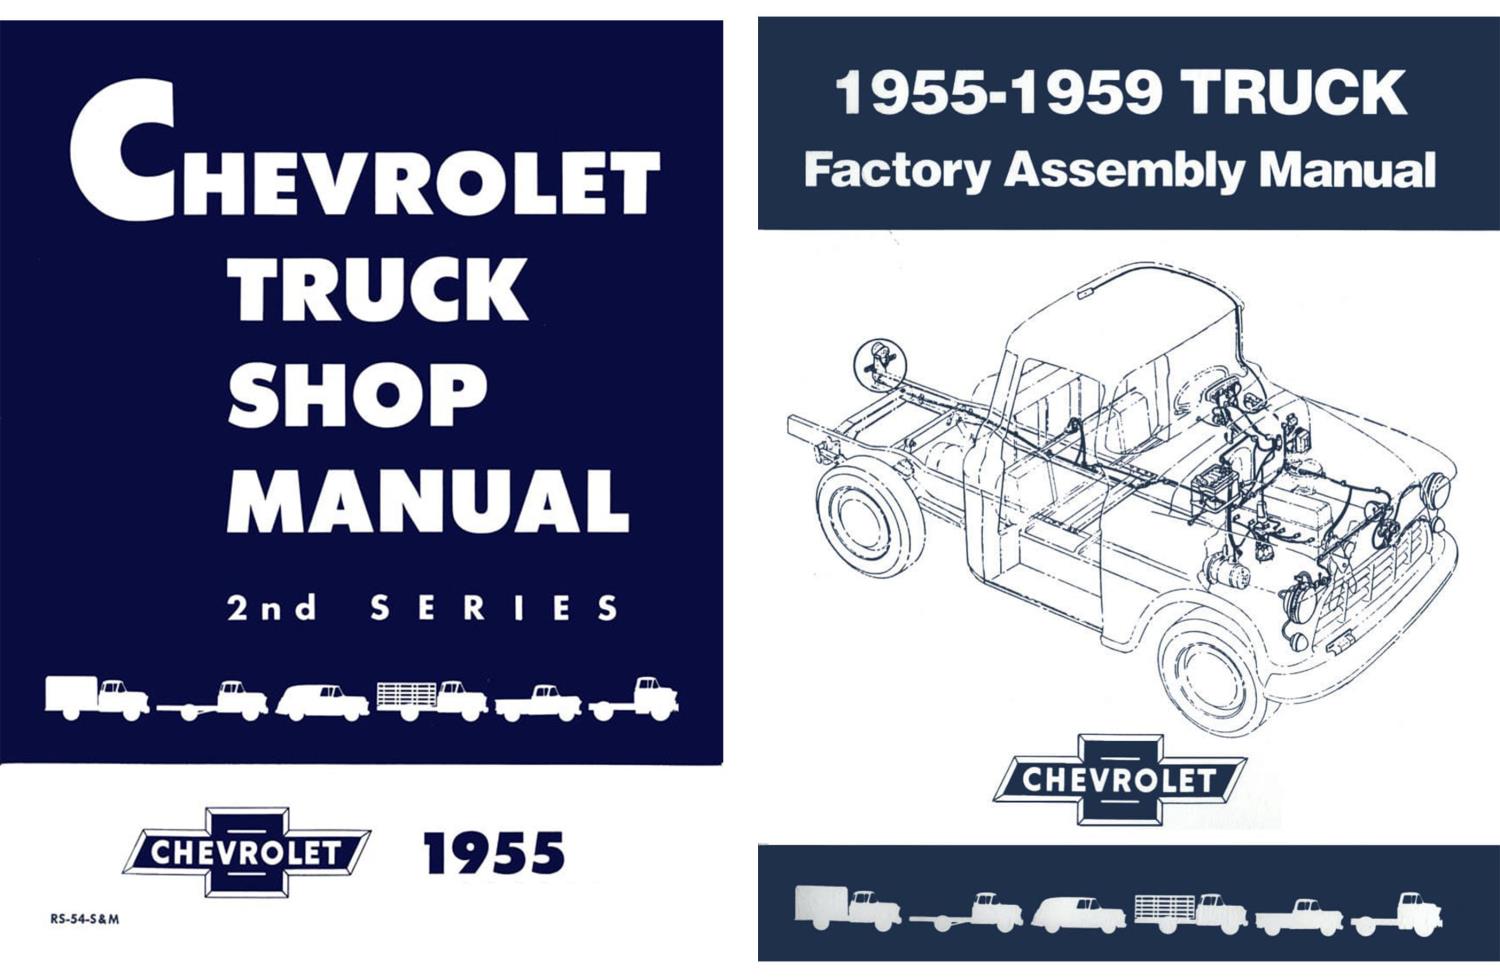 Shop and Assembly Manual Set for 1955 Chevrolet